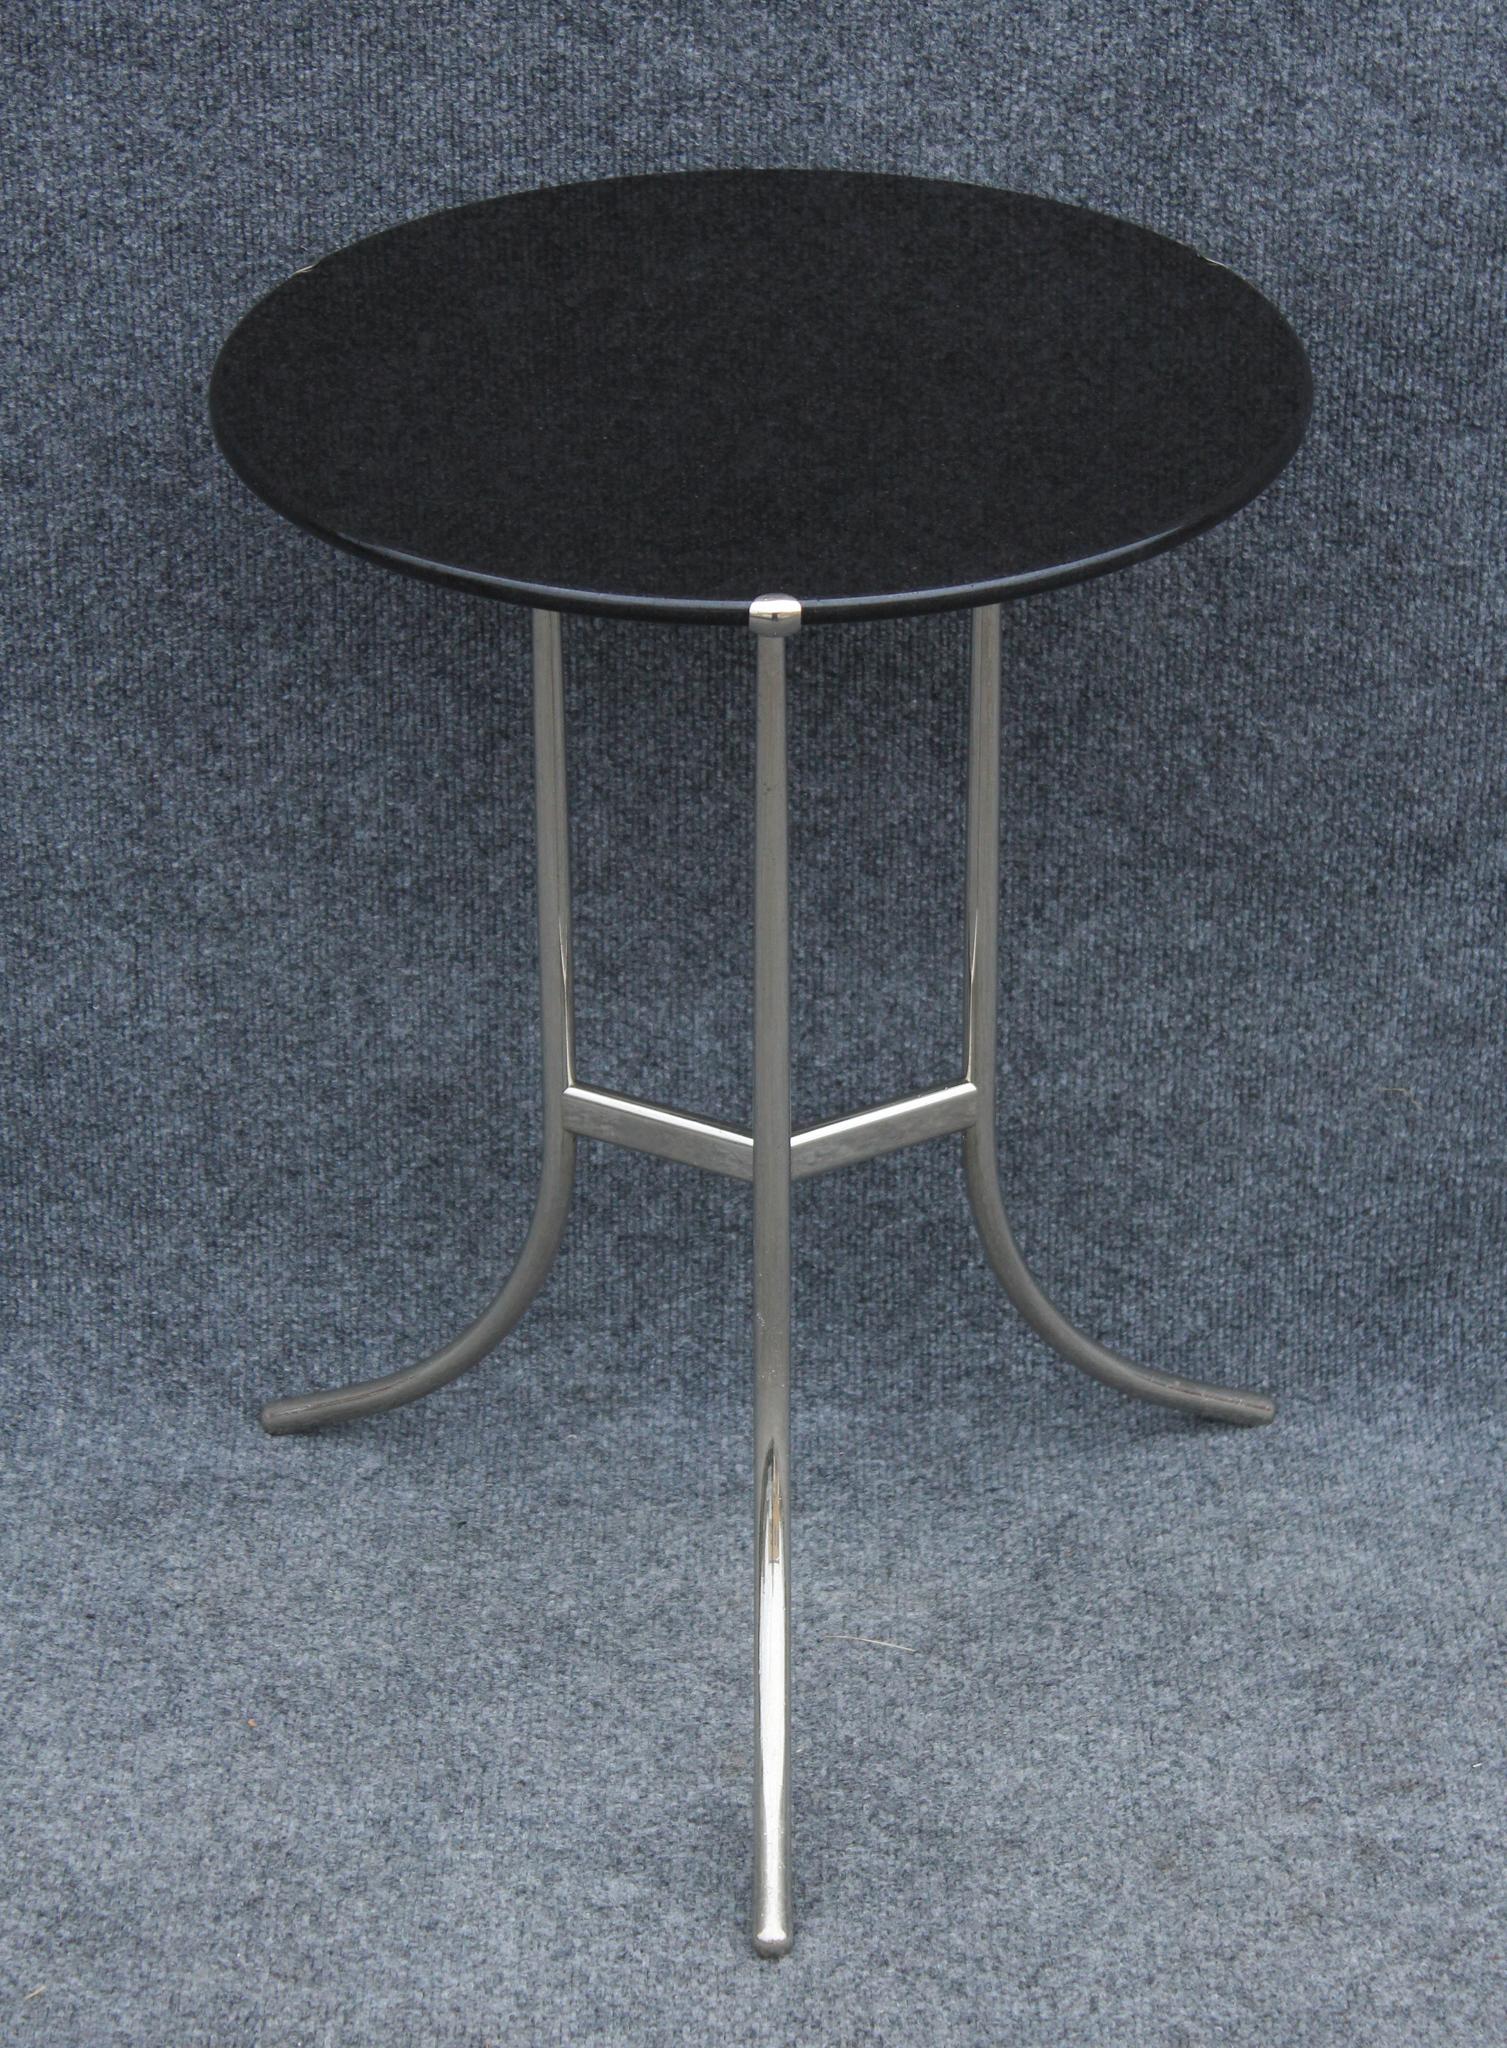 Made in the 1970s, this table was designed by architect and edgineer Cedric Hartman. In the beginning of his career, he made a name for himself with the iconic 1UWV floor lamp, but soon became known for extremely high production quality and exacting